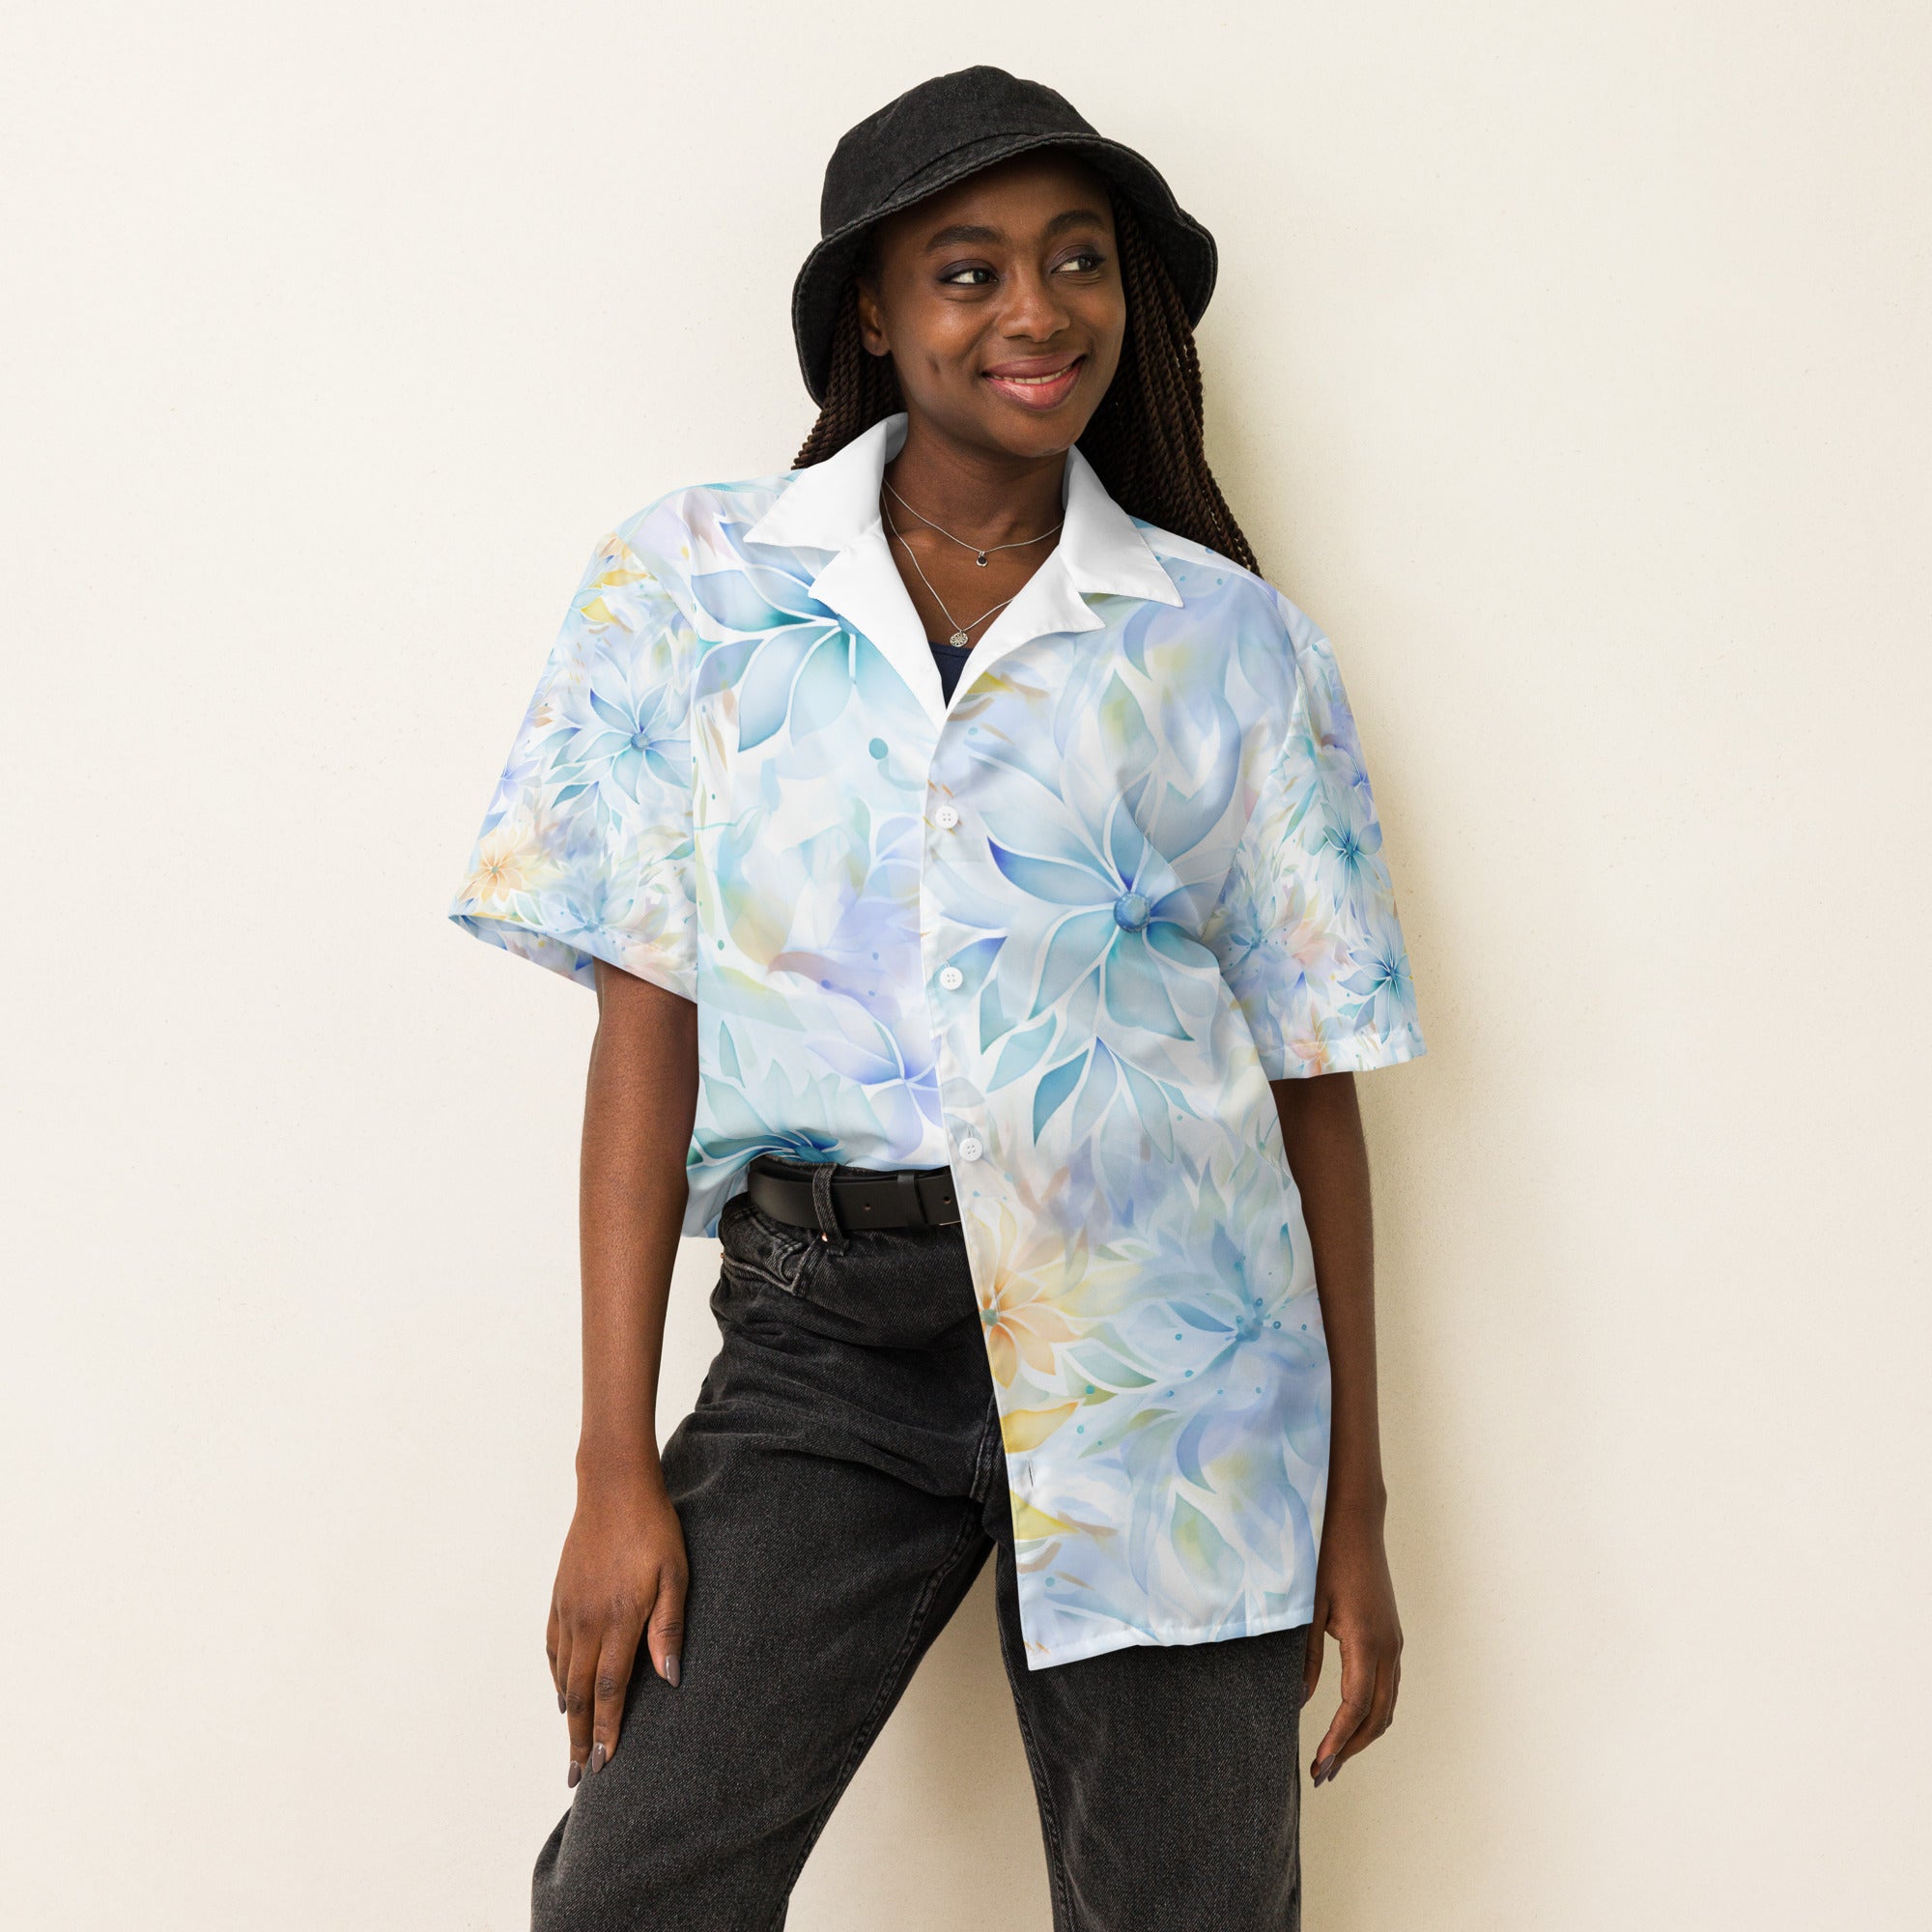 Subtle Elegance in Bloom: Whispering Floral Soft Pastel Unisex Hawaii Shirt - A Chic & Stylish Statement in Every Thread